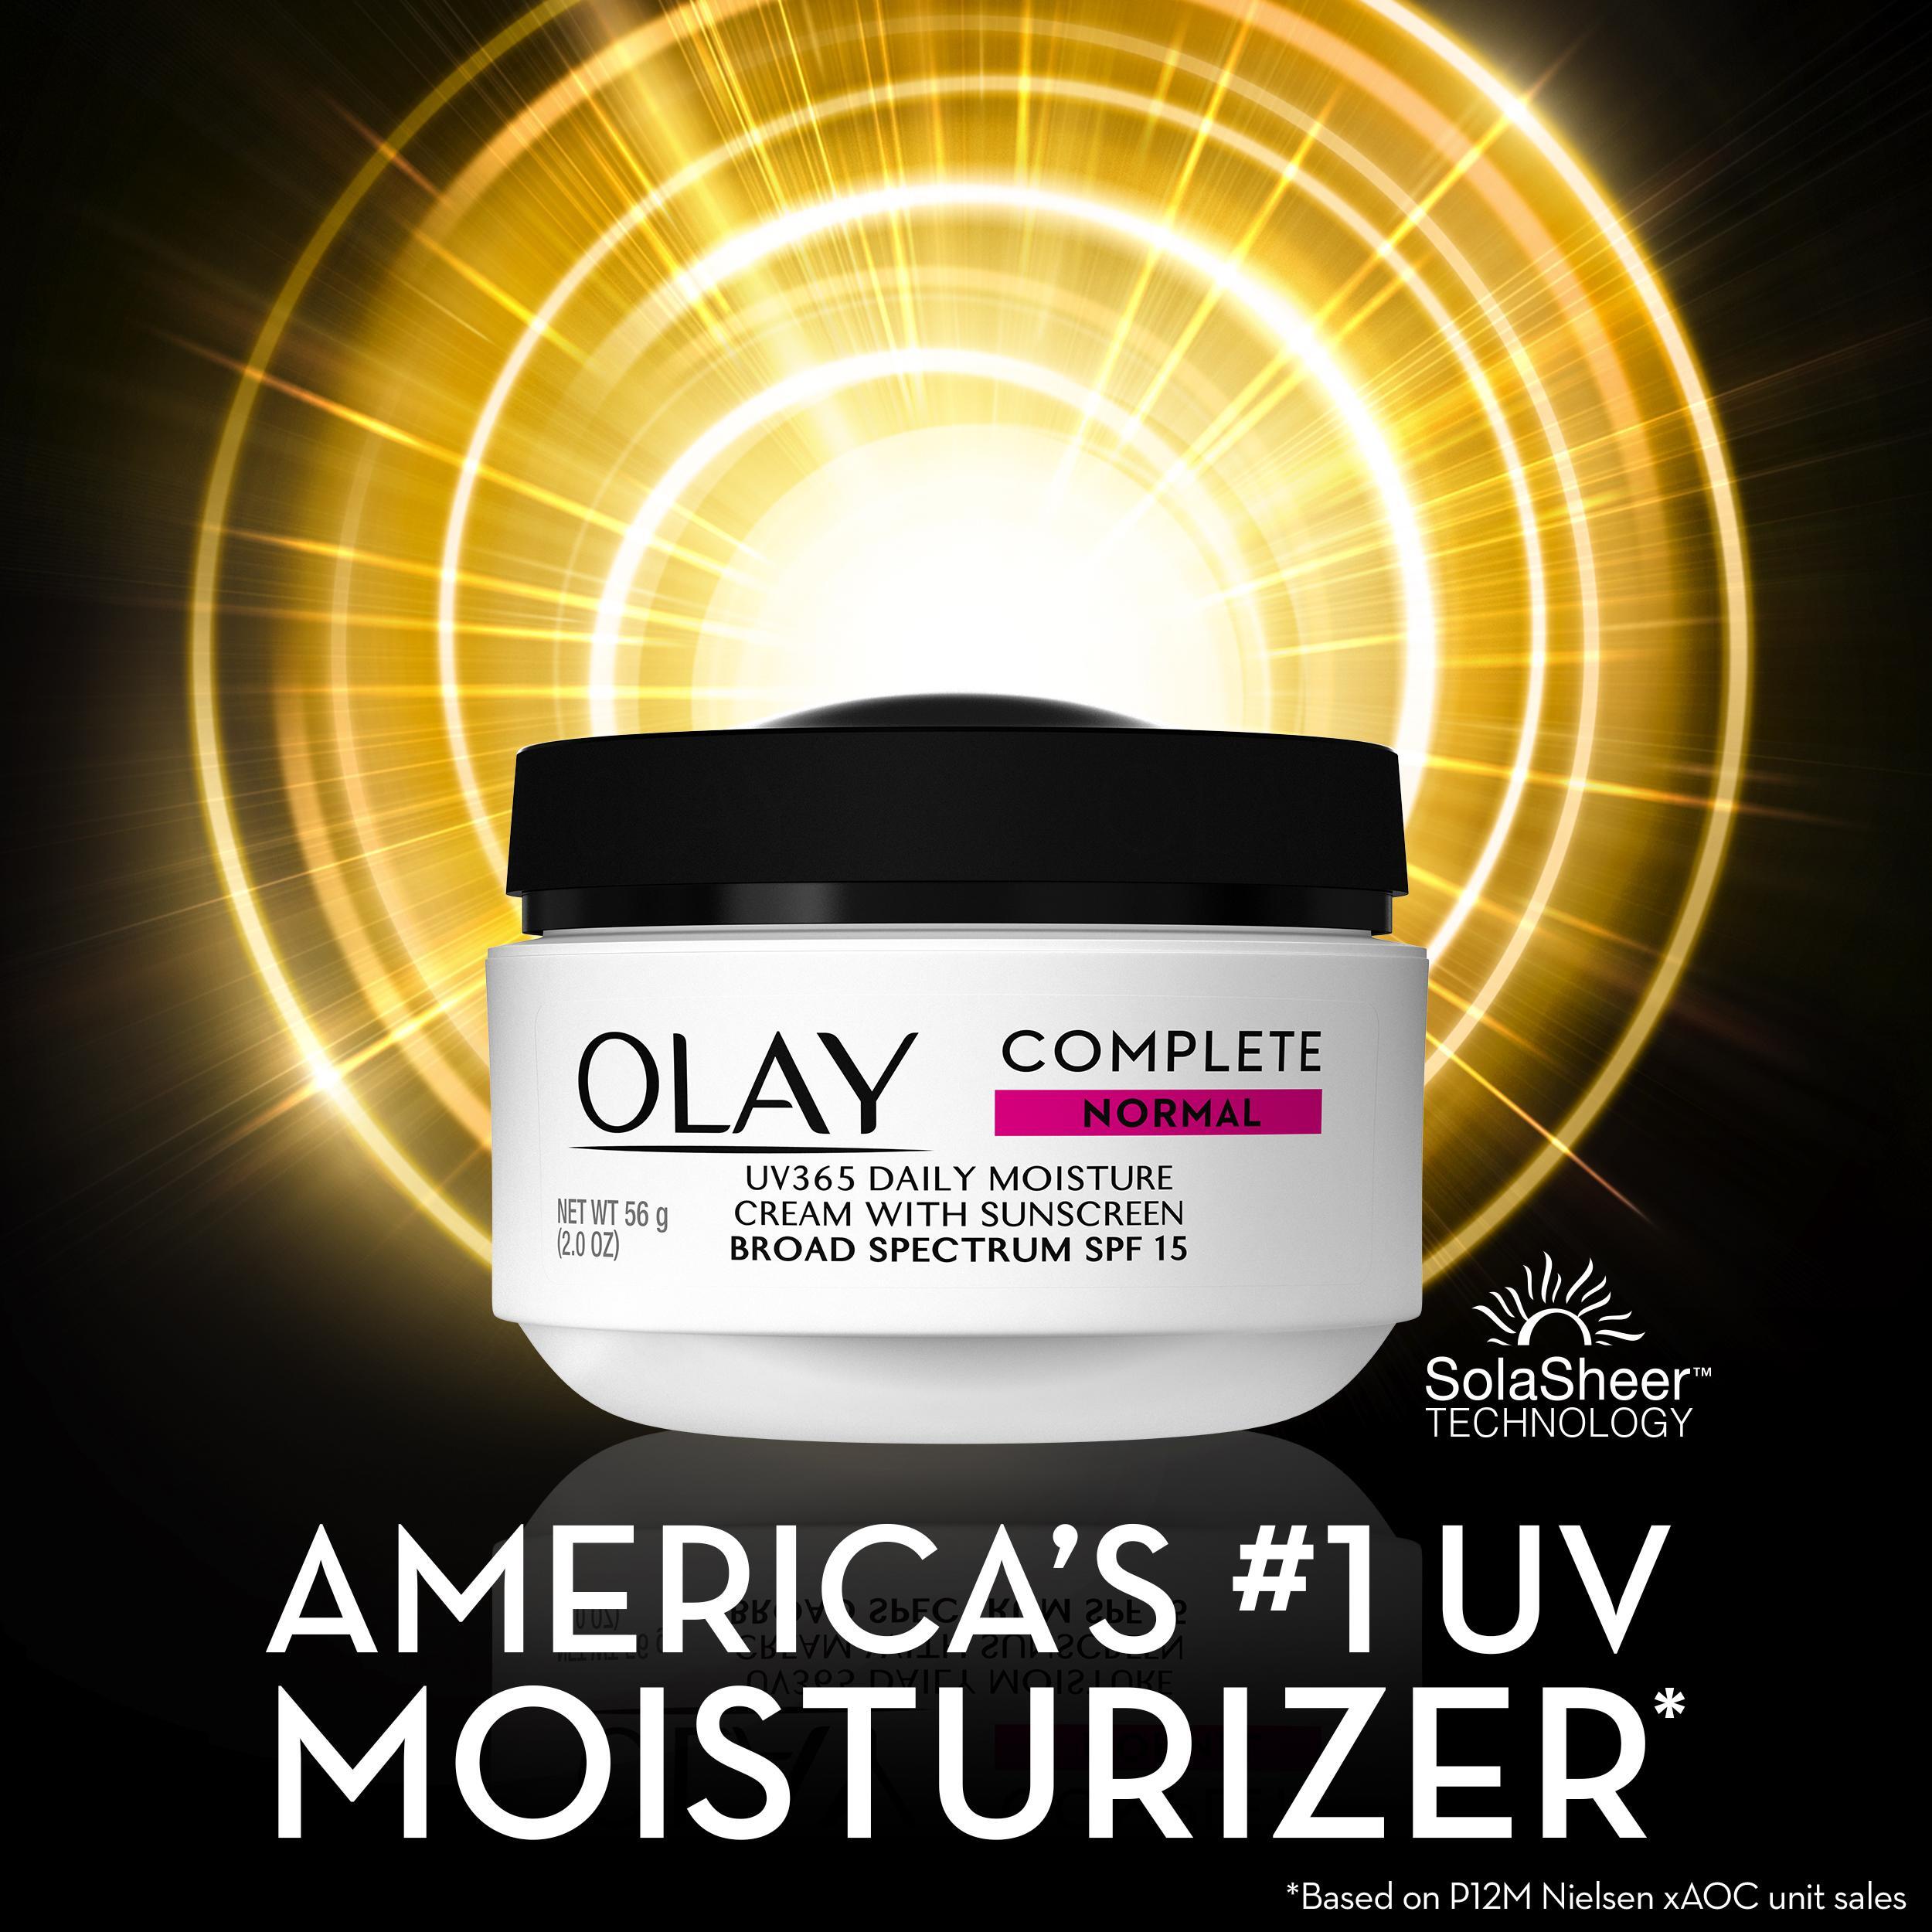 Olay Complete Cream Moisturizer with SPF 15 Normal, 2.0 oz - image 4 of 8